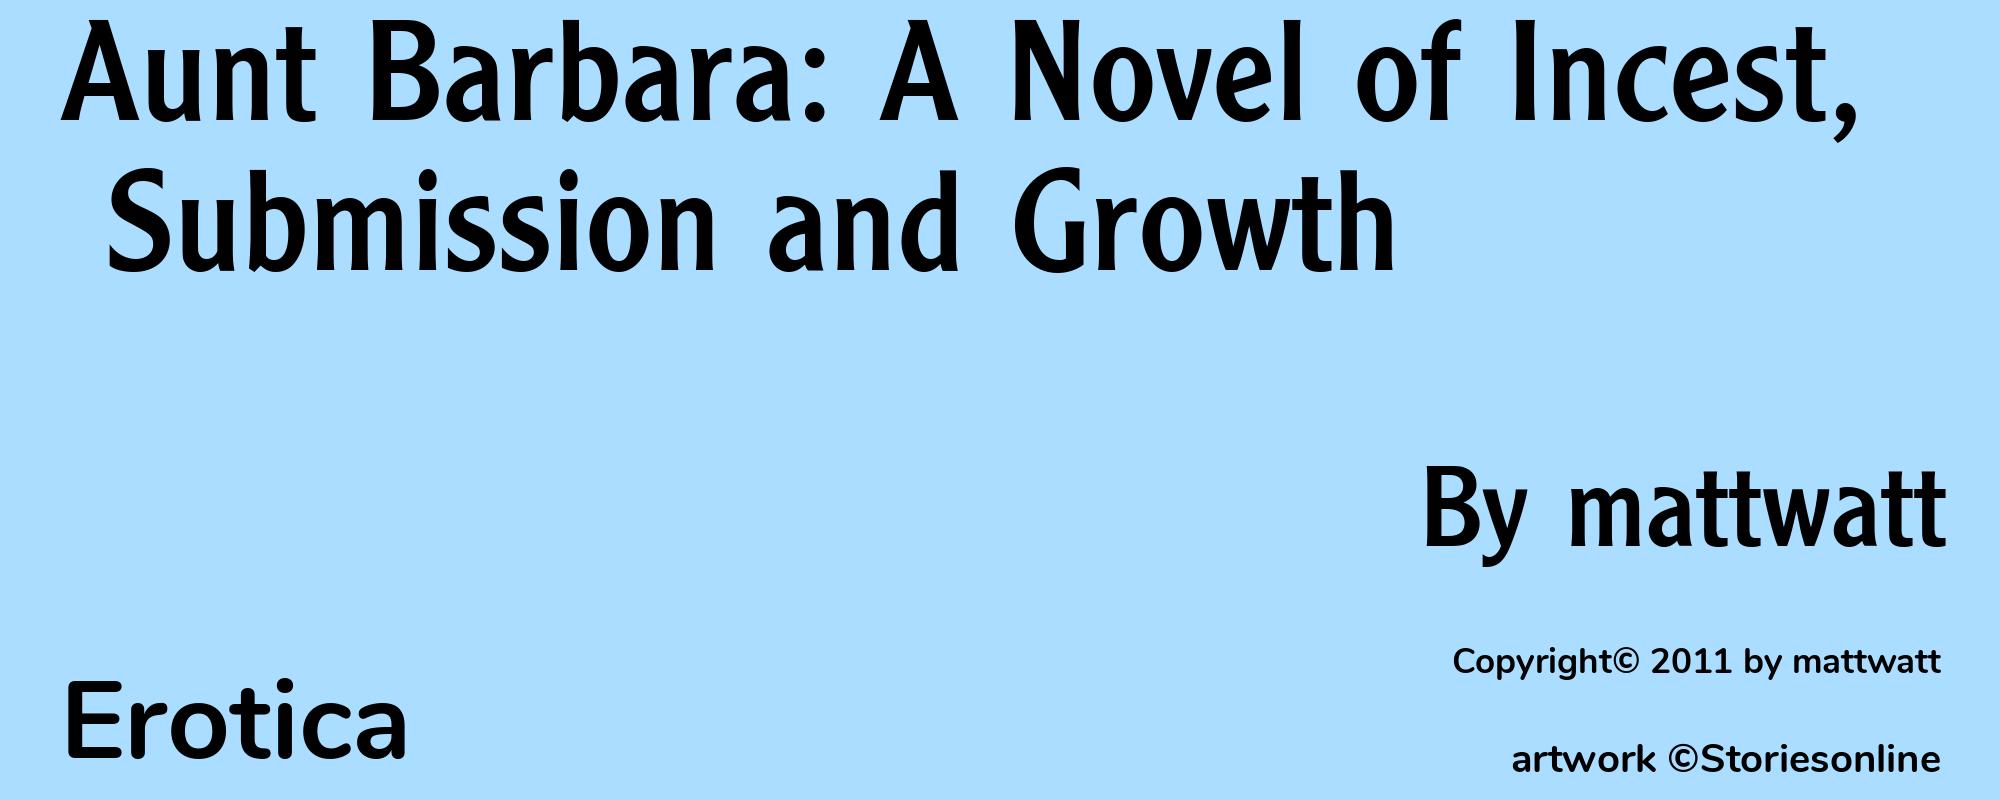 Aunt Barbara: A Novel of Incest, Submission and Growth - Cover